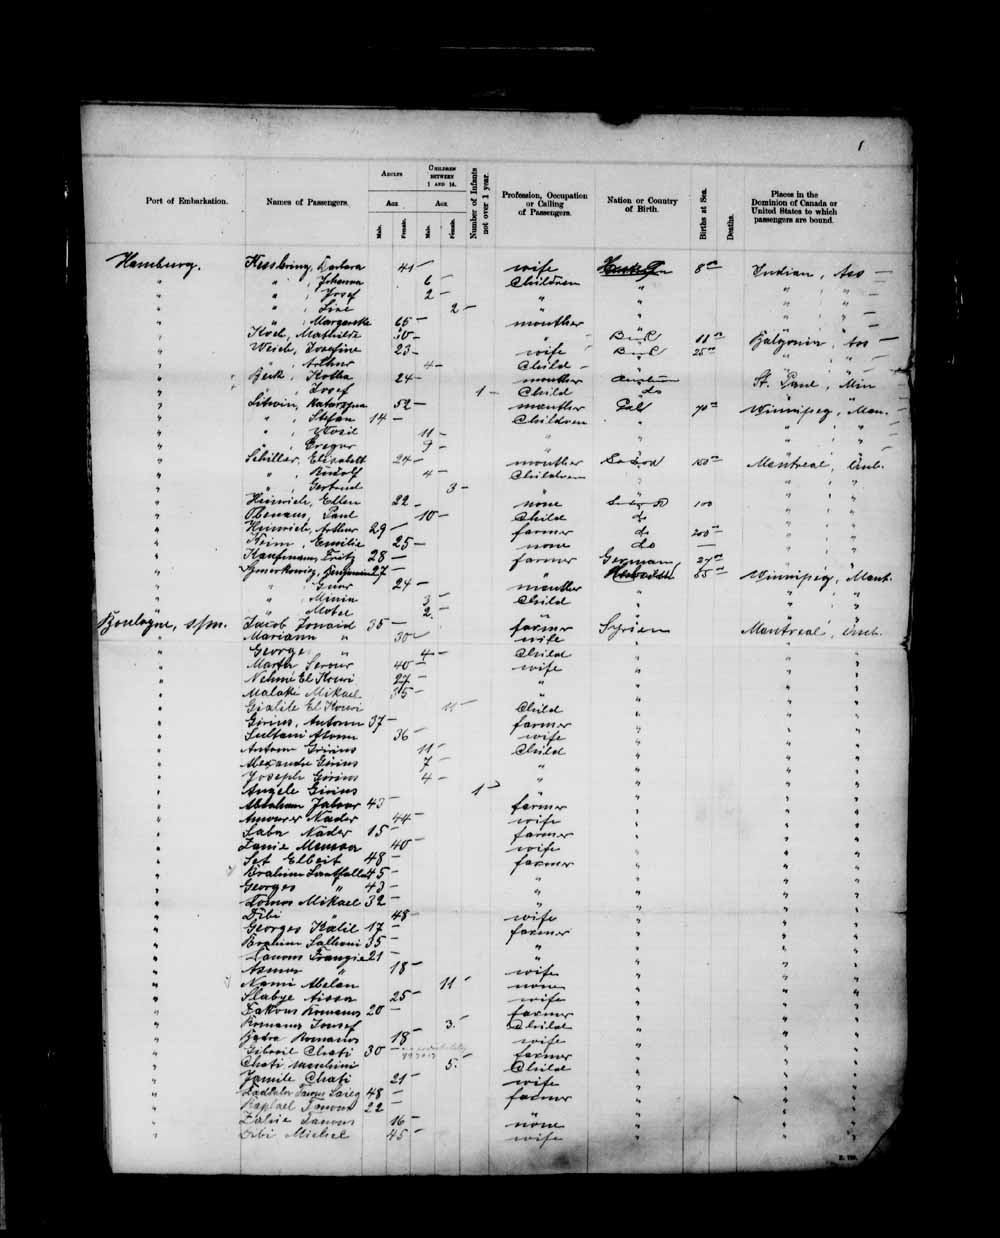 Digitized page of Passenger Lists for Image No.: e003691365